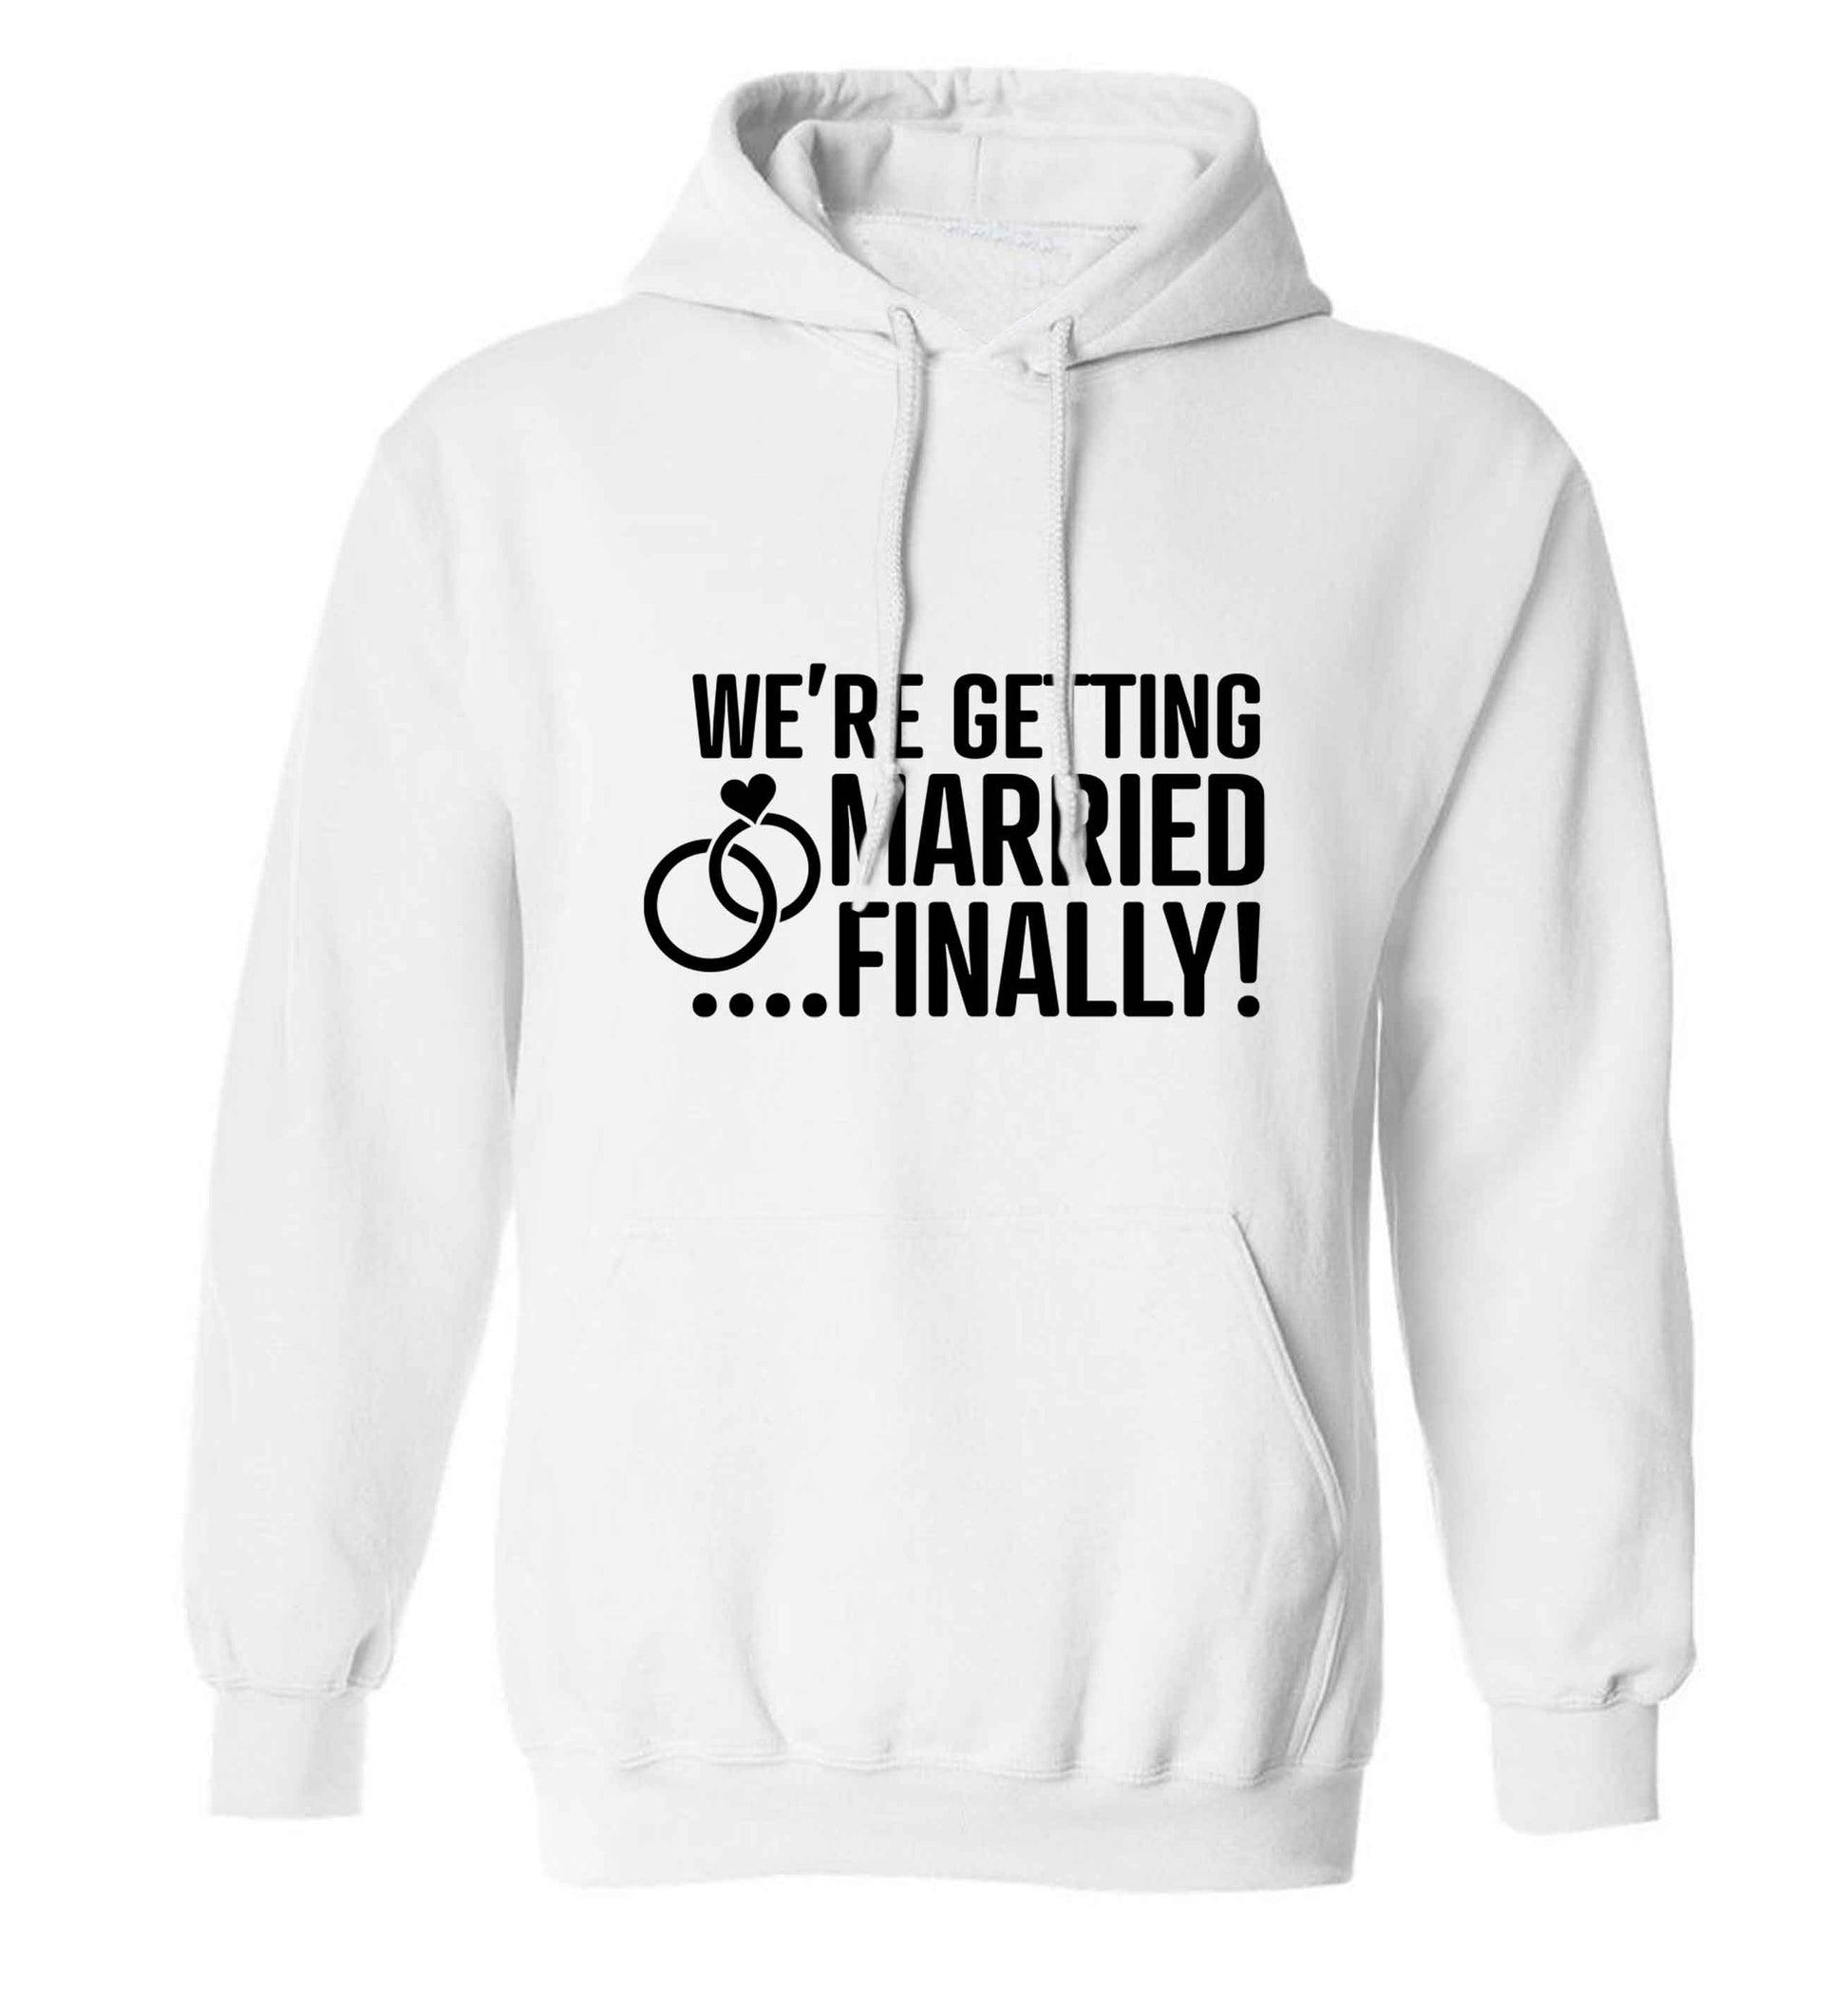 It's been a long wait but it's finally happening! Let everyone know you're celebrating your big day soon! adults unisex white hoodie 2XL